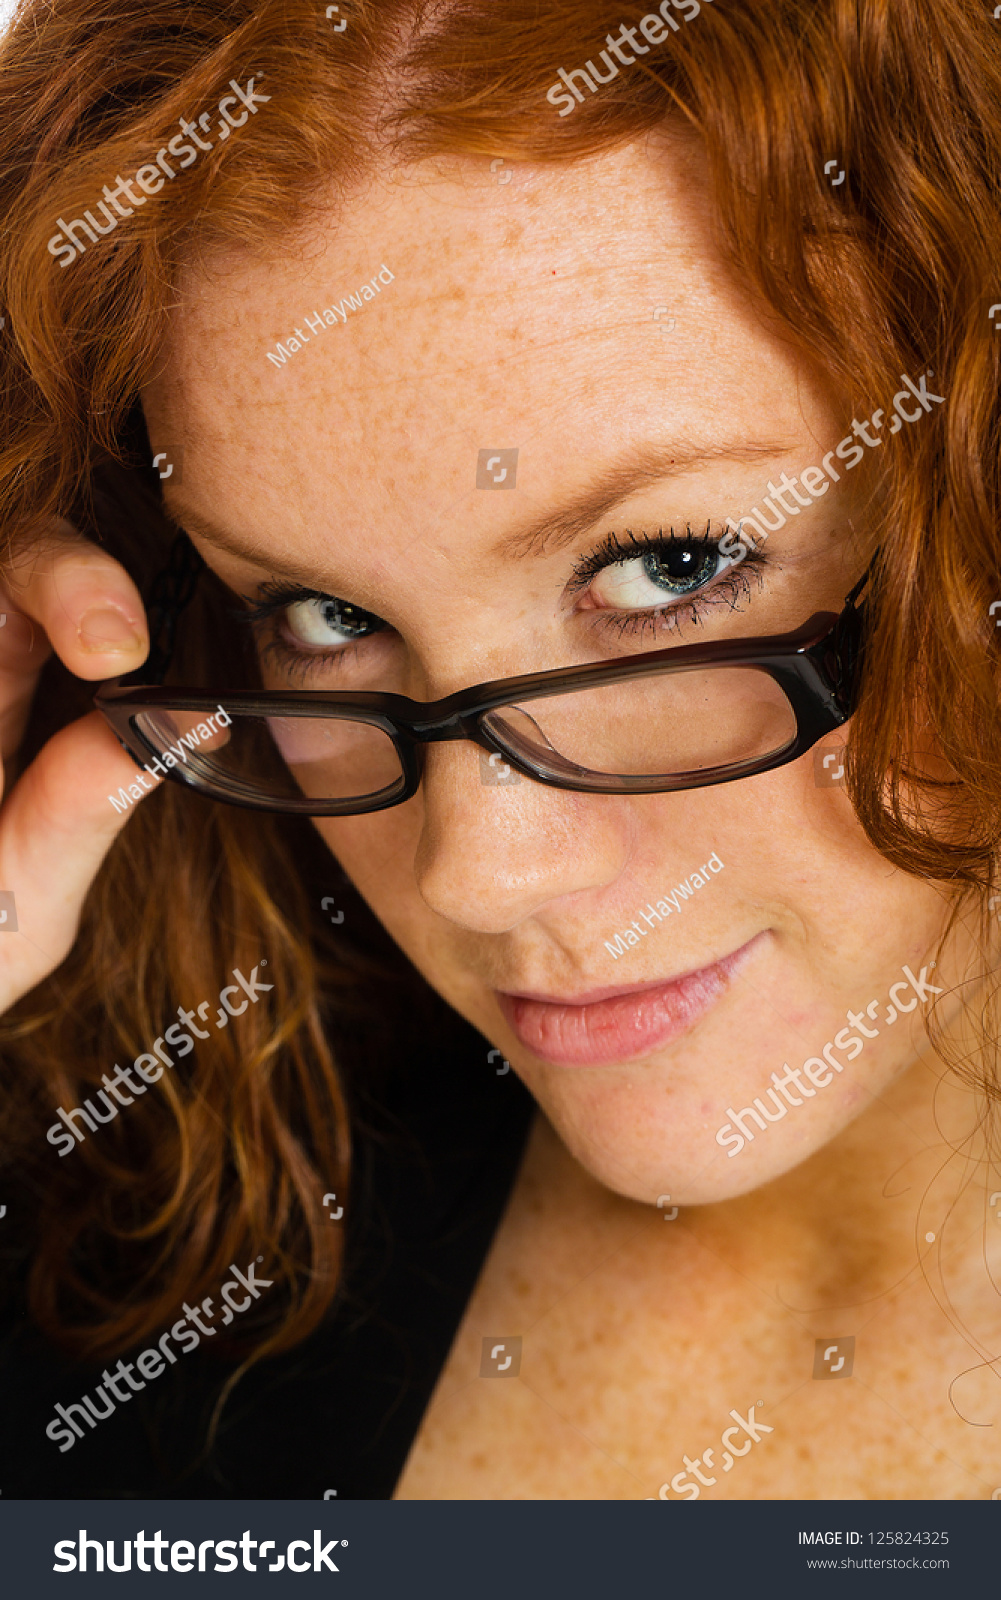 A Beautiful Woman Peering Over Her Glasses In A Seductive Manner Stock